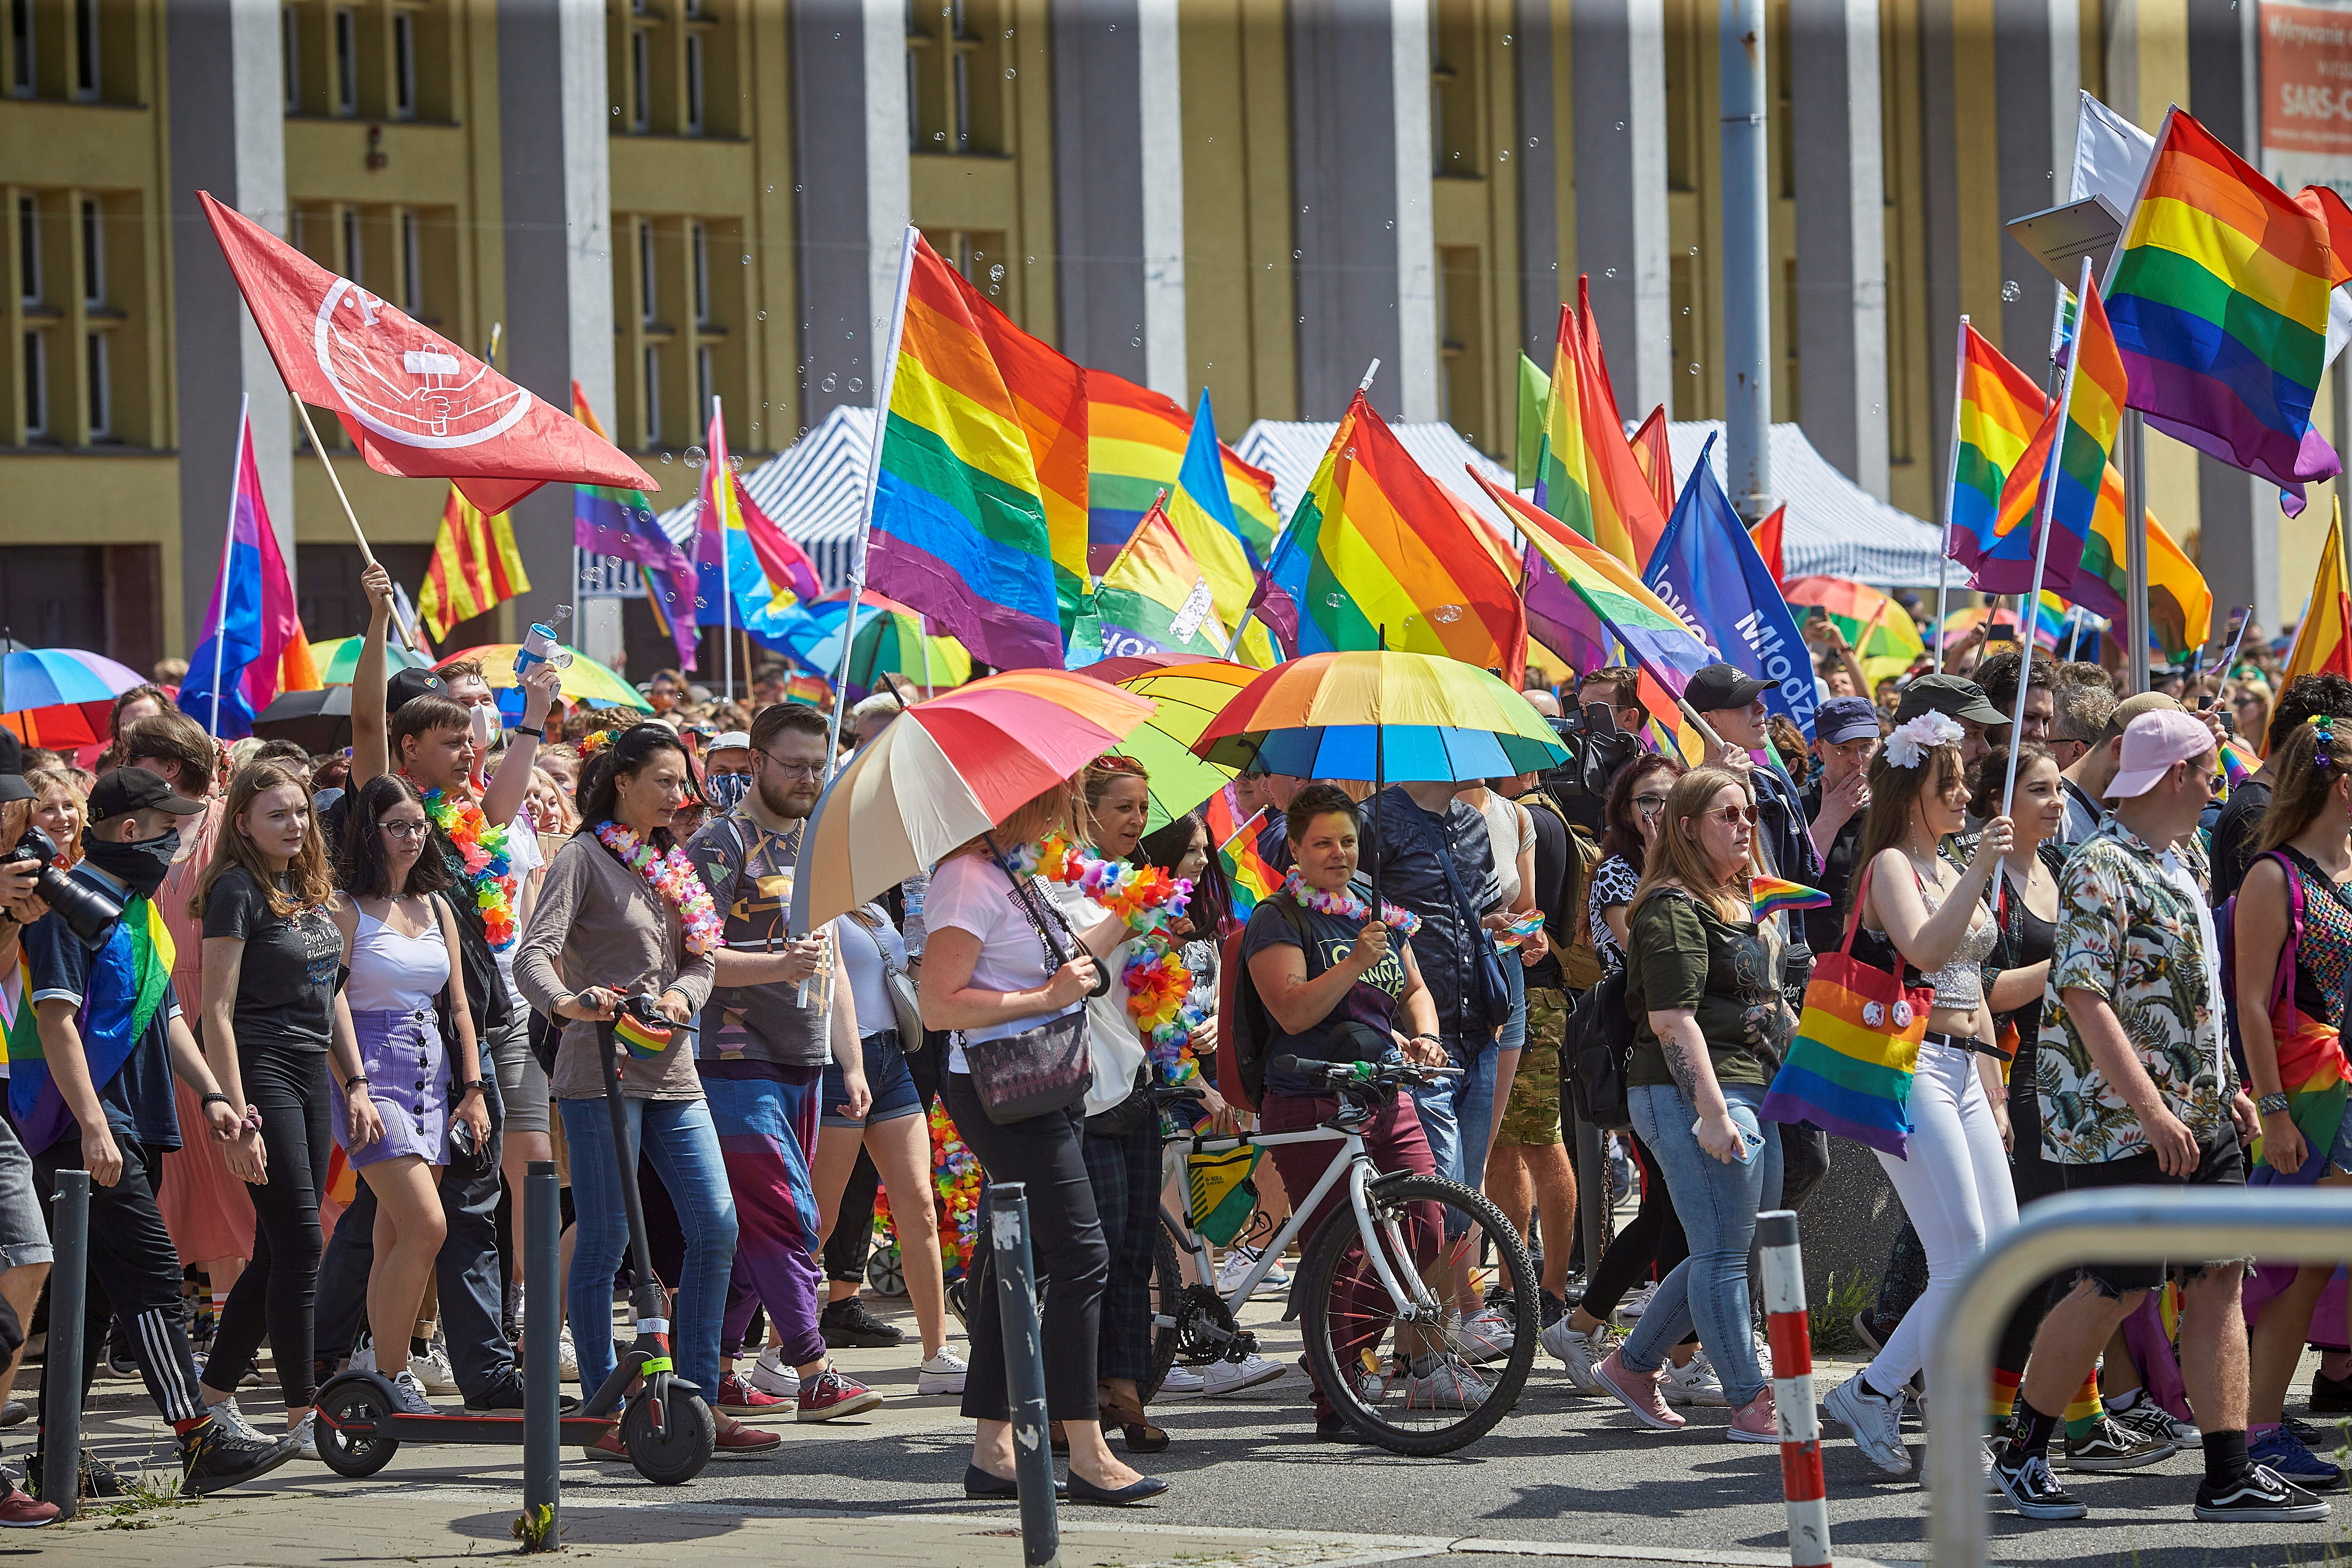 Demonstrators take part in the Equality March in support of the LGBT community, in Lodz, Poland June 26, 2021